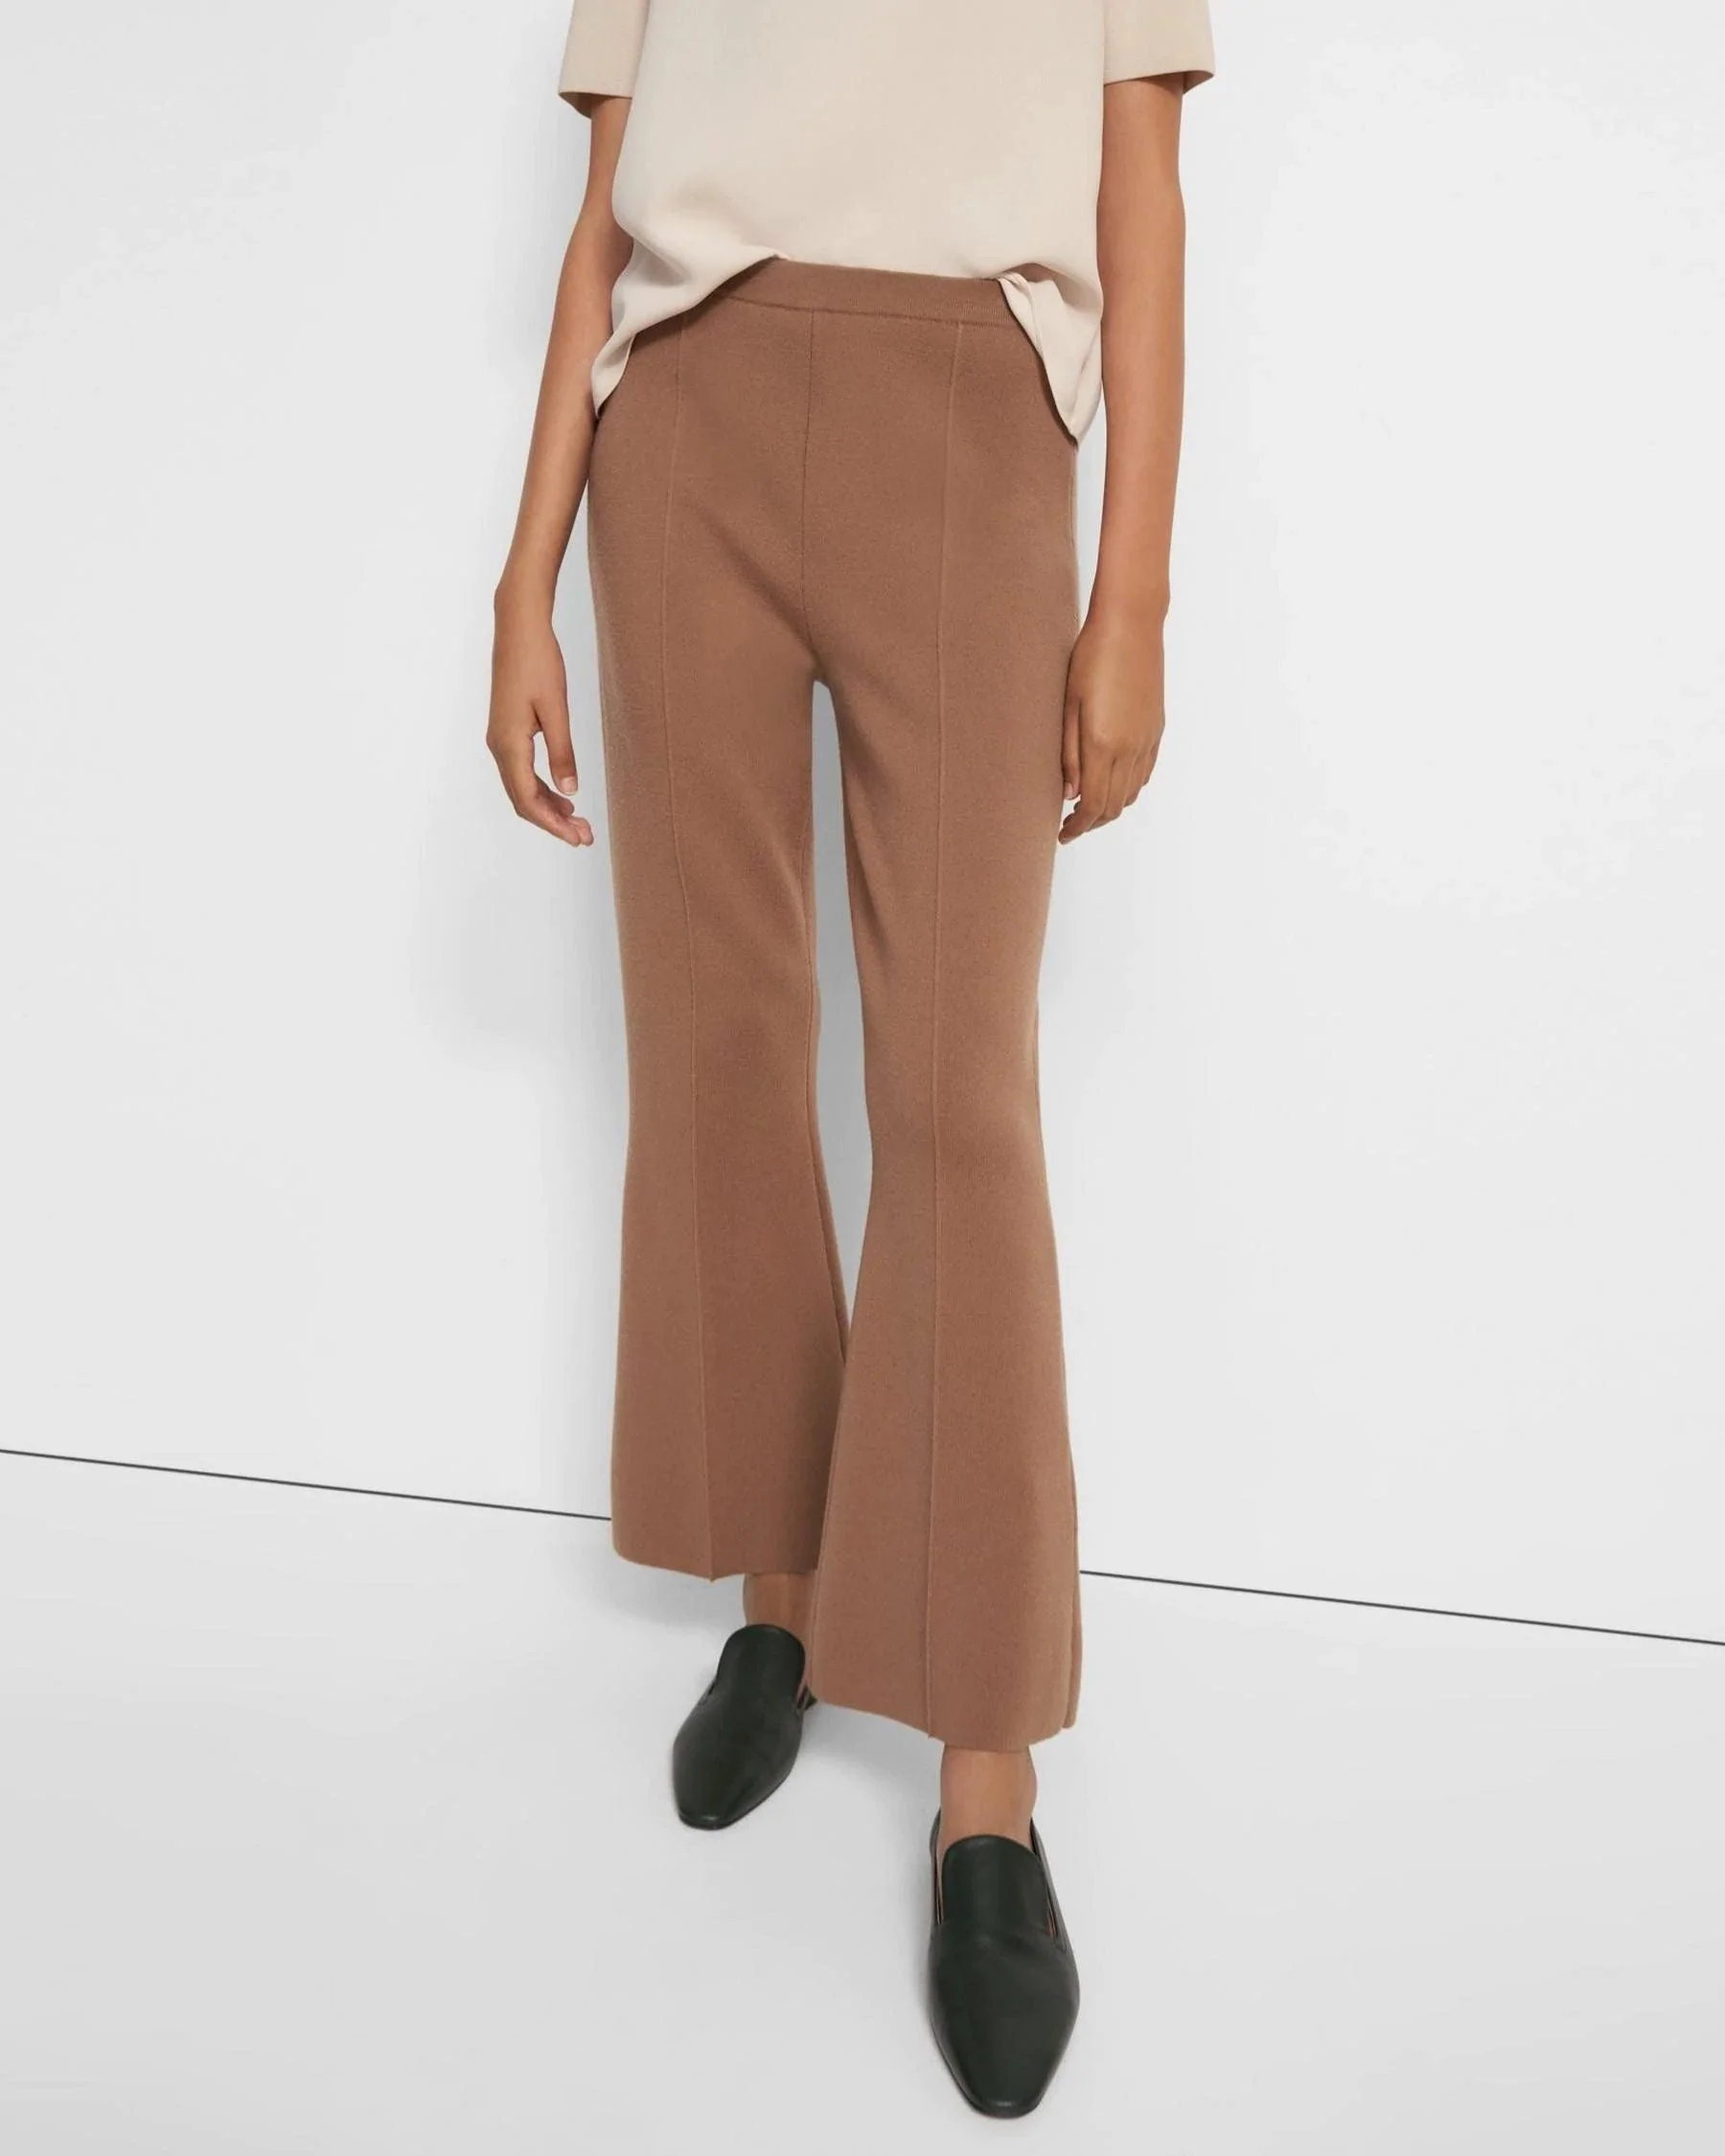 Theory Flare Pant in Empire Wool, Light Camel